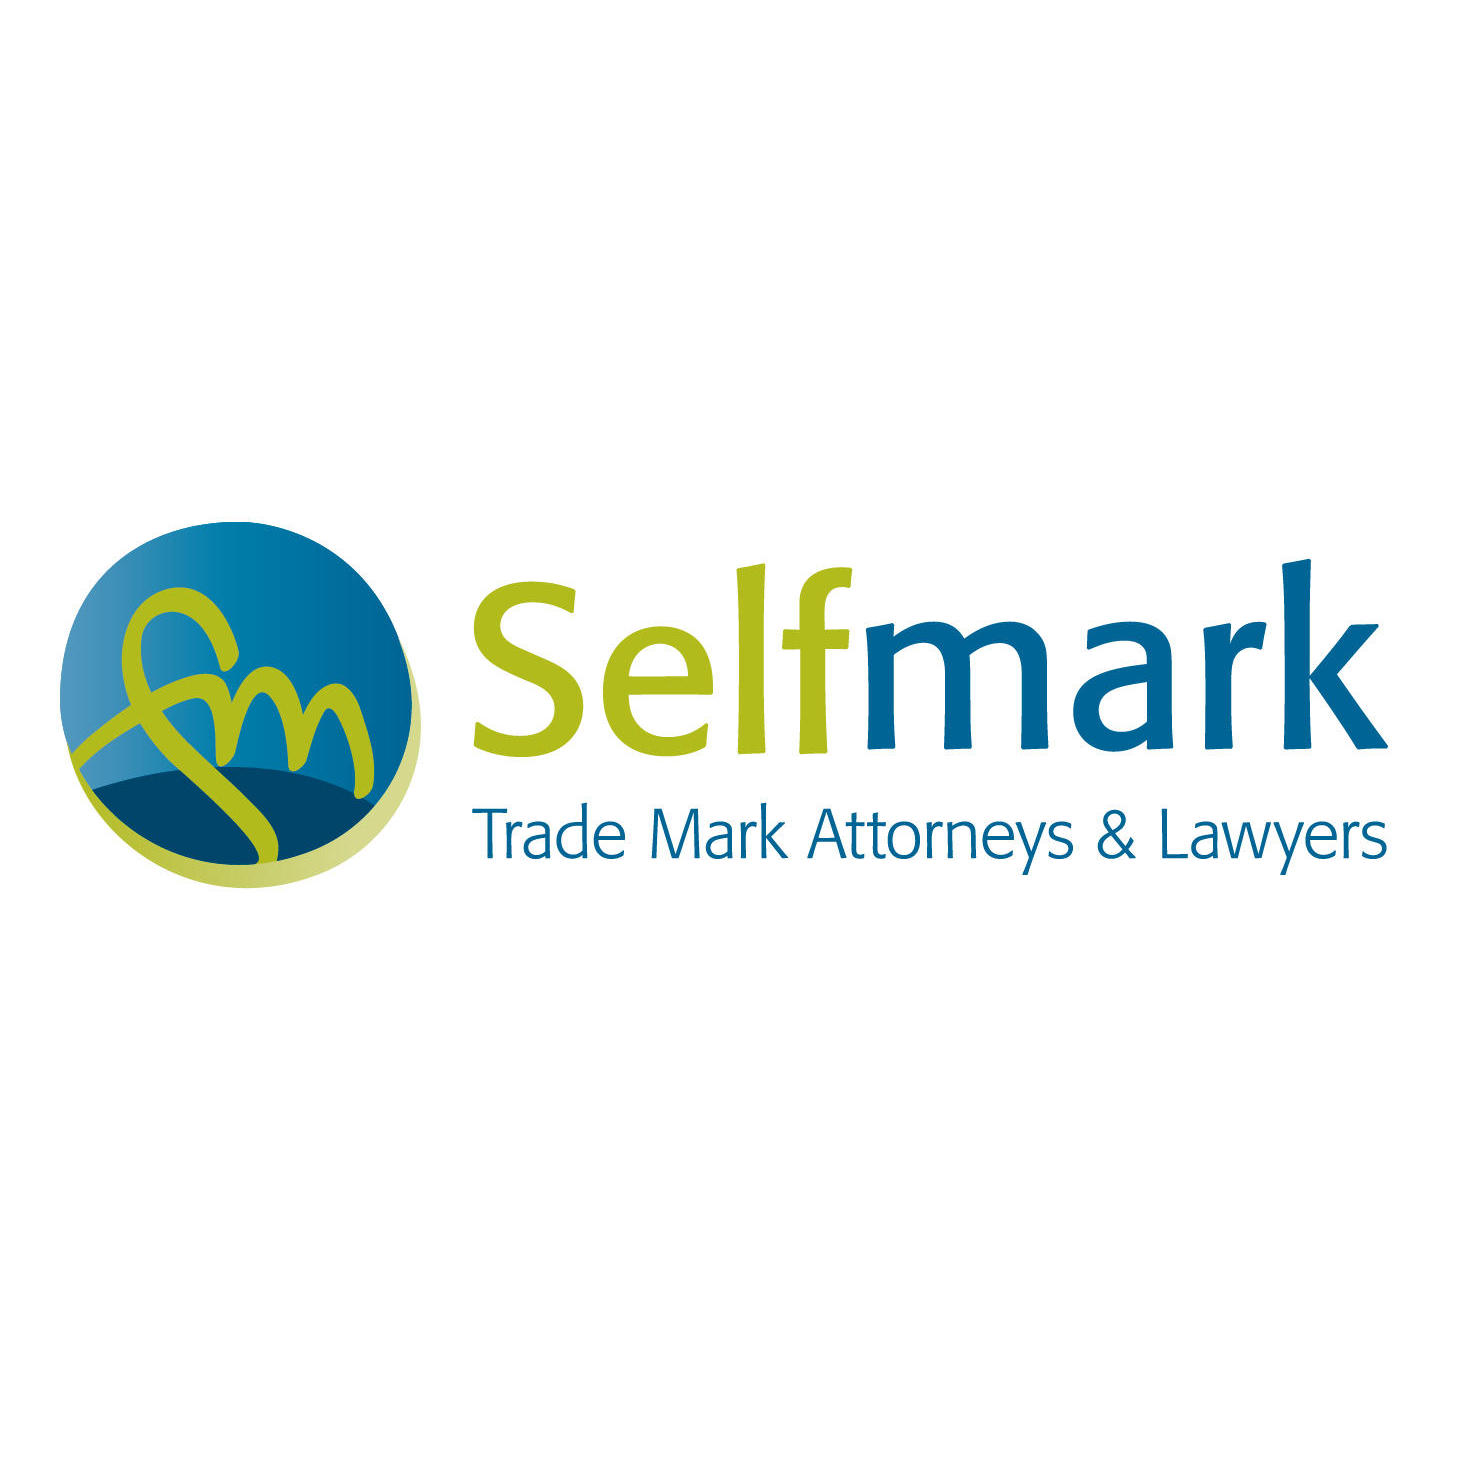 Selfmark Trade Mark Attorneys and Lawyers Logo